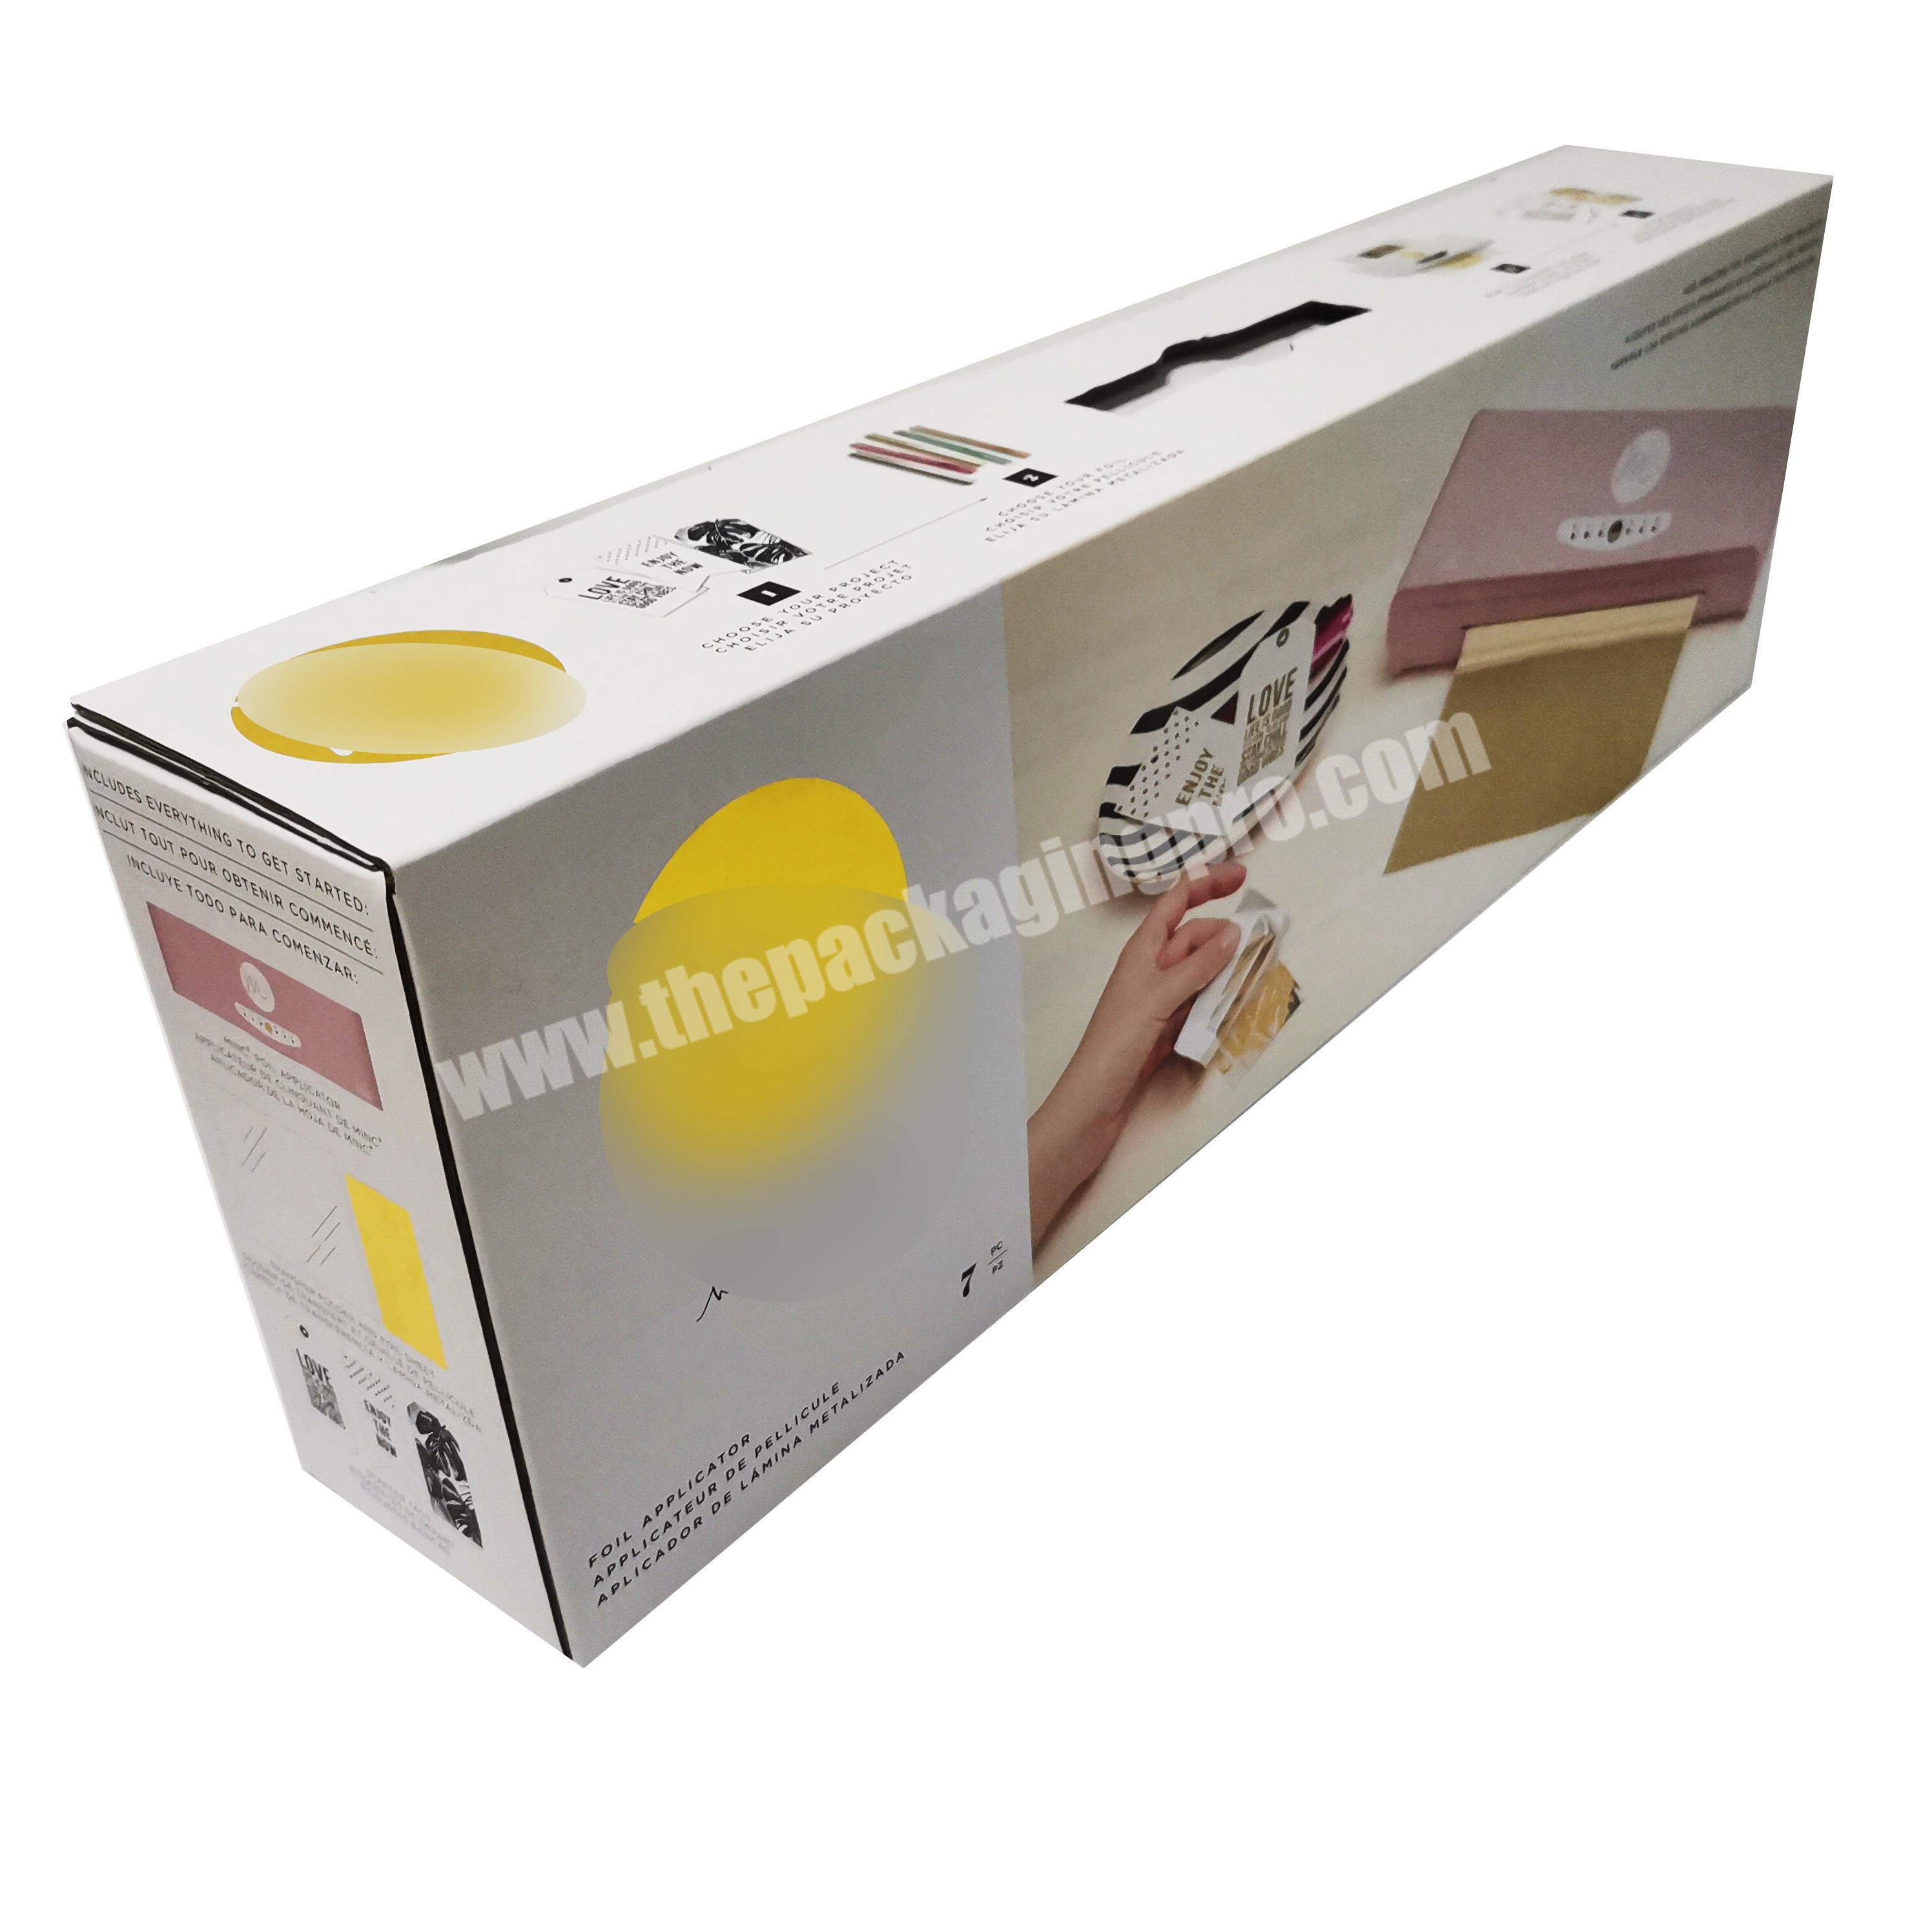 white case gold stamping oem custom box new design carton durable packing with free sample